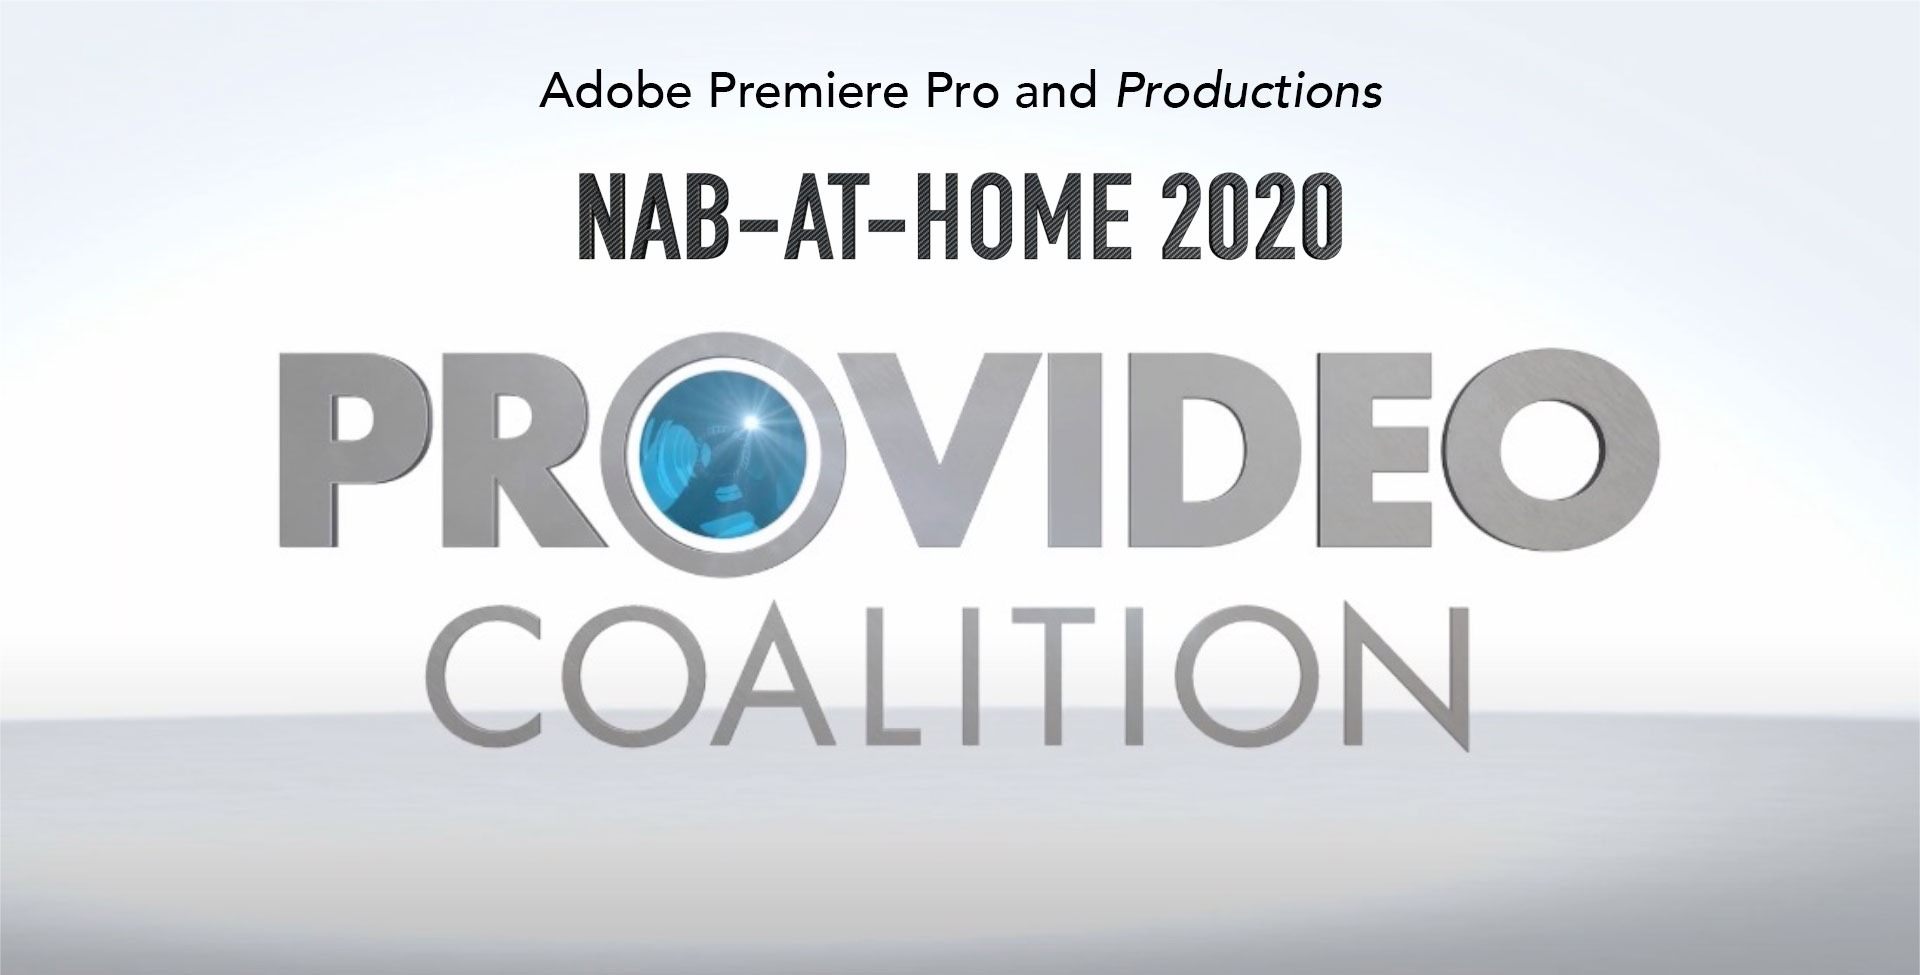 Adobe Premiere Pro Productions NAB-AT-HOME